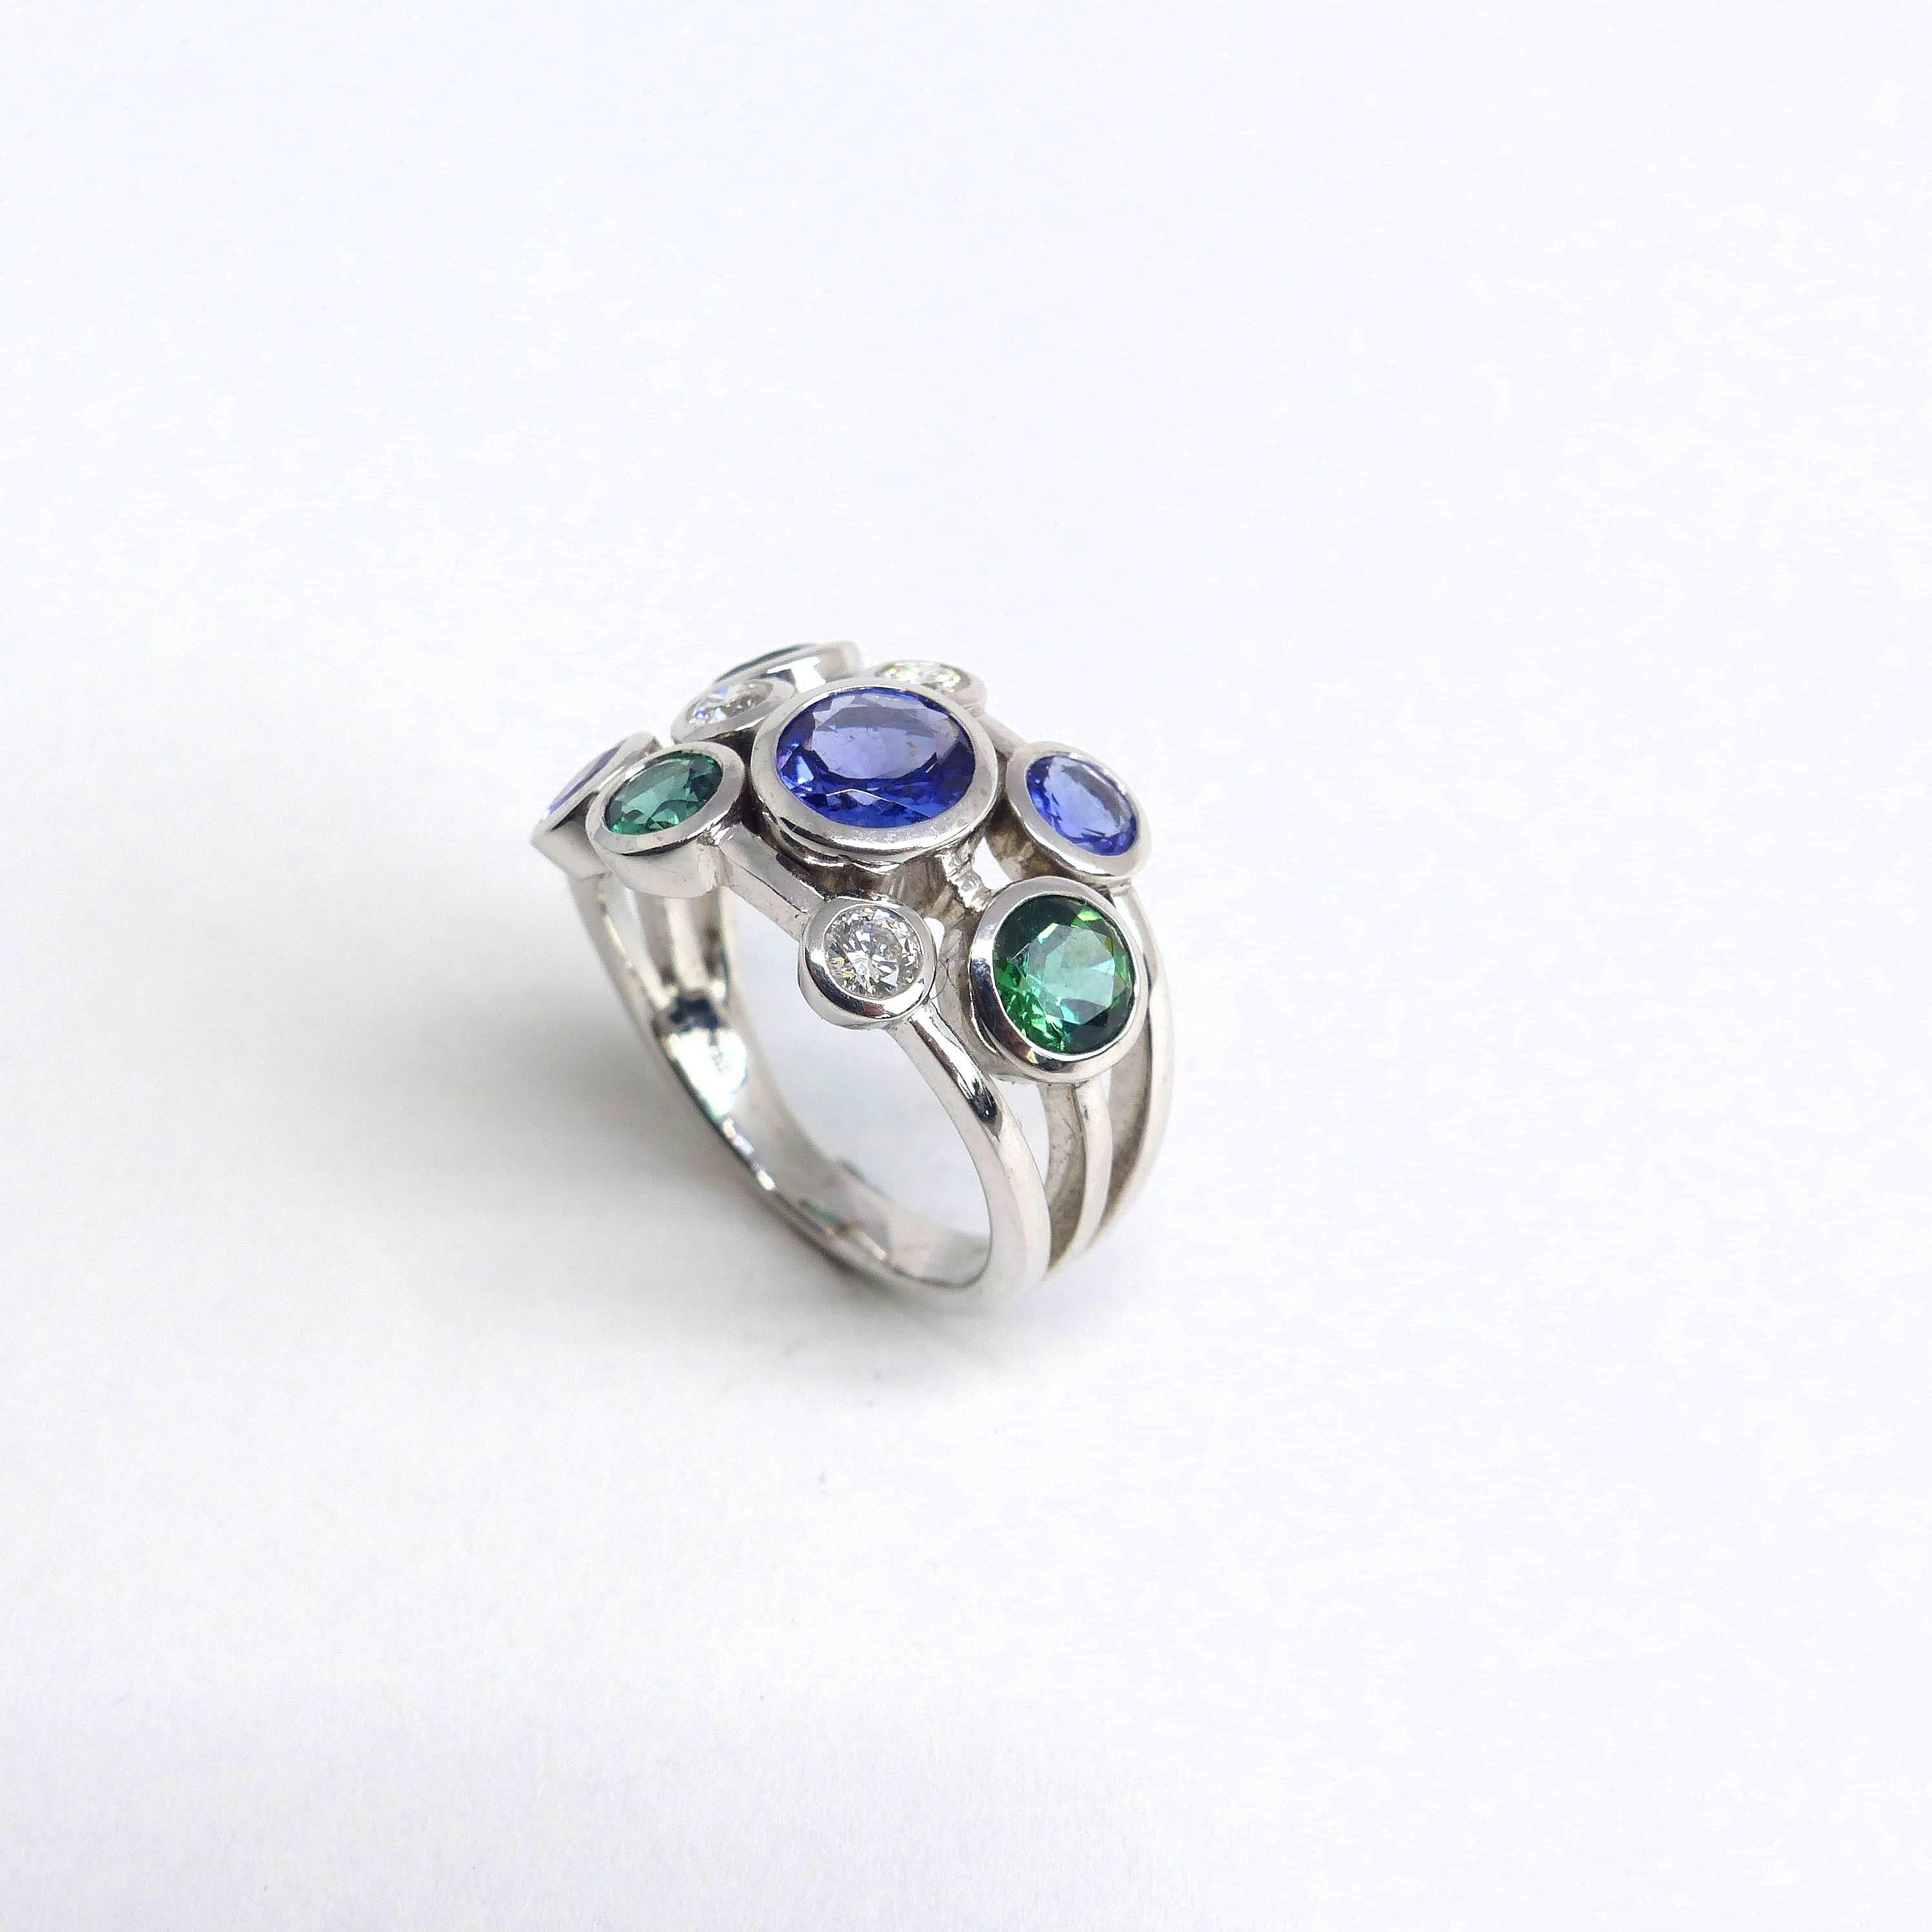 Thomas Leyser is renowned for his contemporary jewellery designs utilizing fine gemstones. 

This 18k white gold (9.39g) ring is set with 3x fine Sapphires (round, 4-6mm, 2.98ct) + 3x fine Tourmalines (4-5mm, 1.26ct) + 3x Diamonds (brillant-cut,